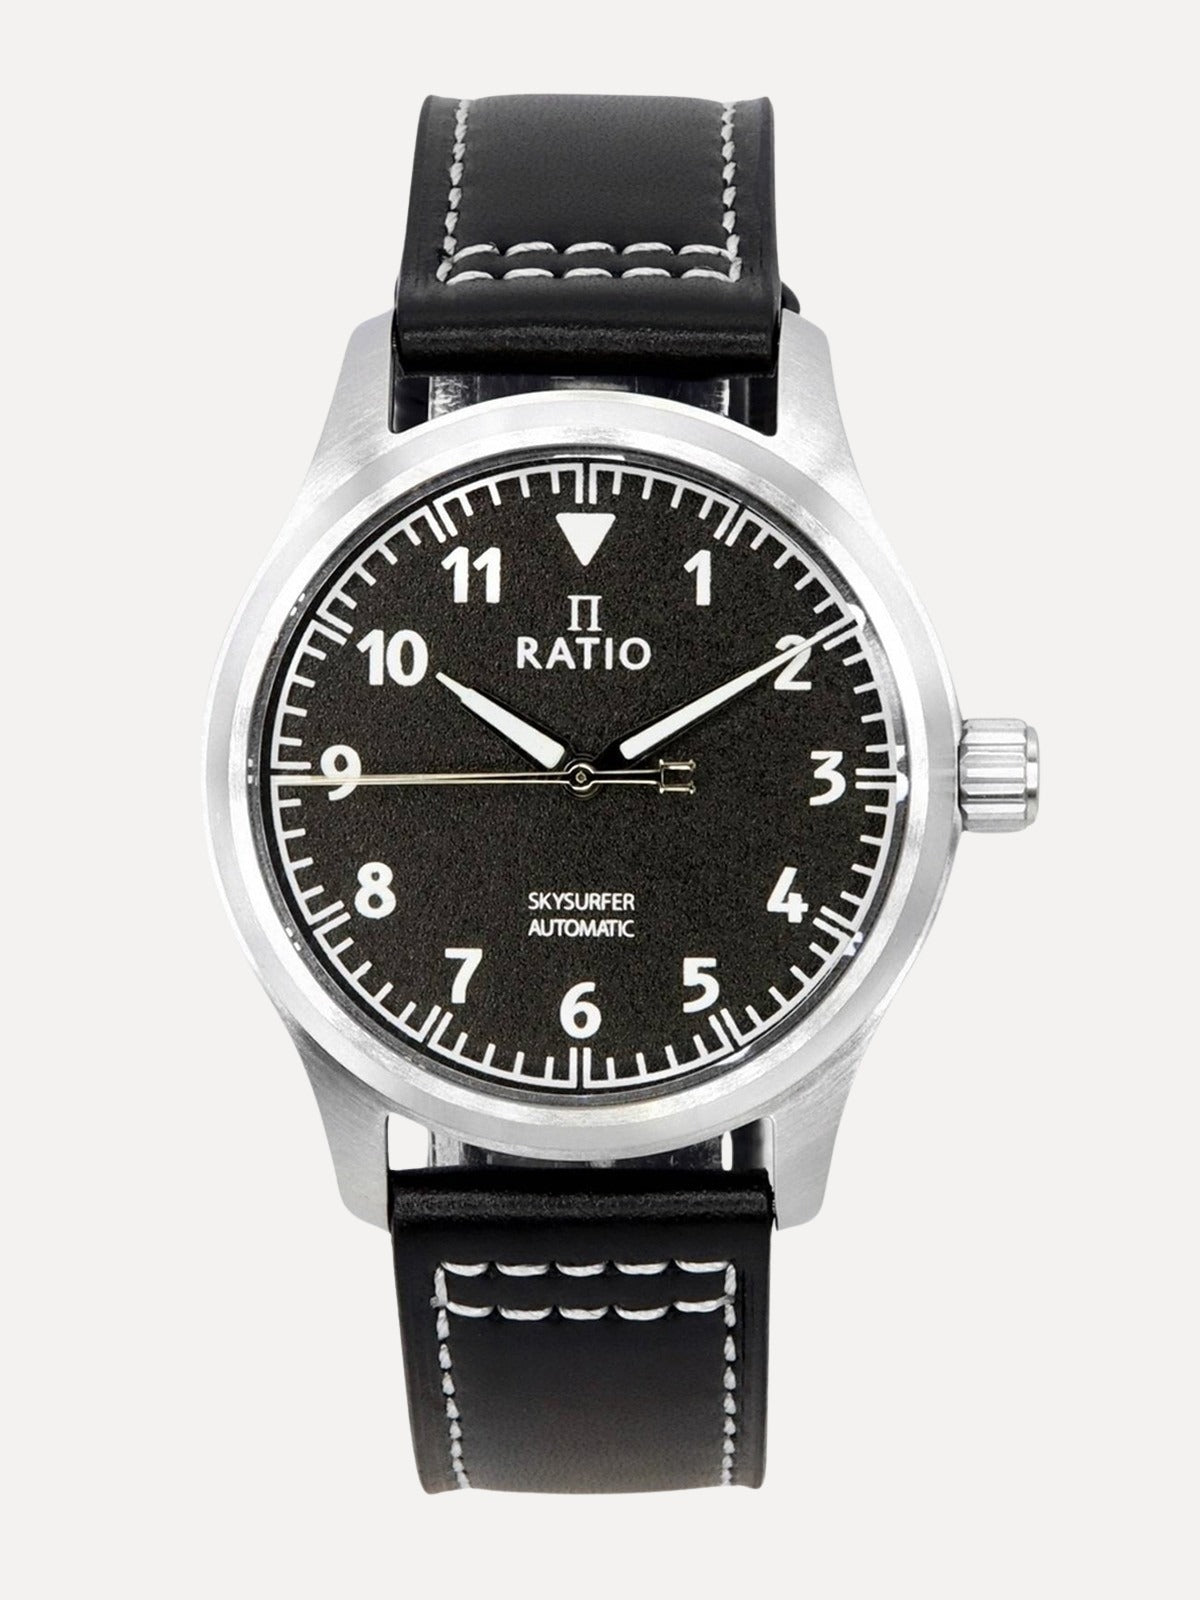 Ratio Skysurfer Pilot Black Textured Dial Leather Automatic RTS303 200M Mens Watch